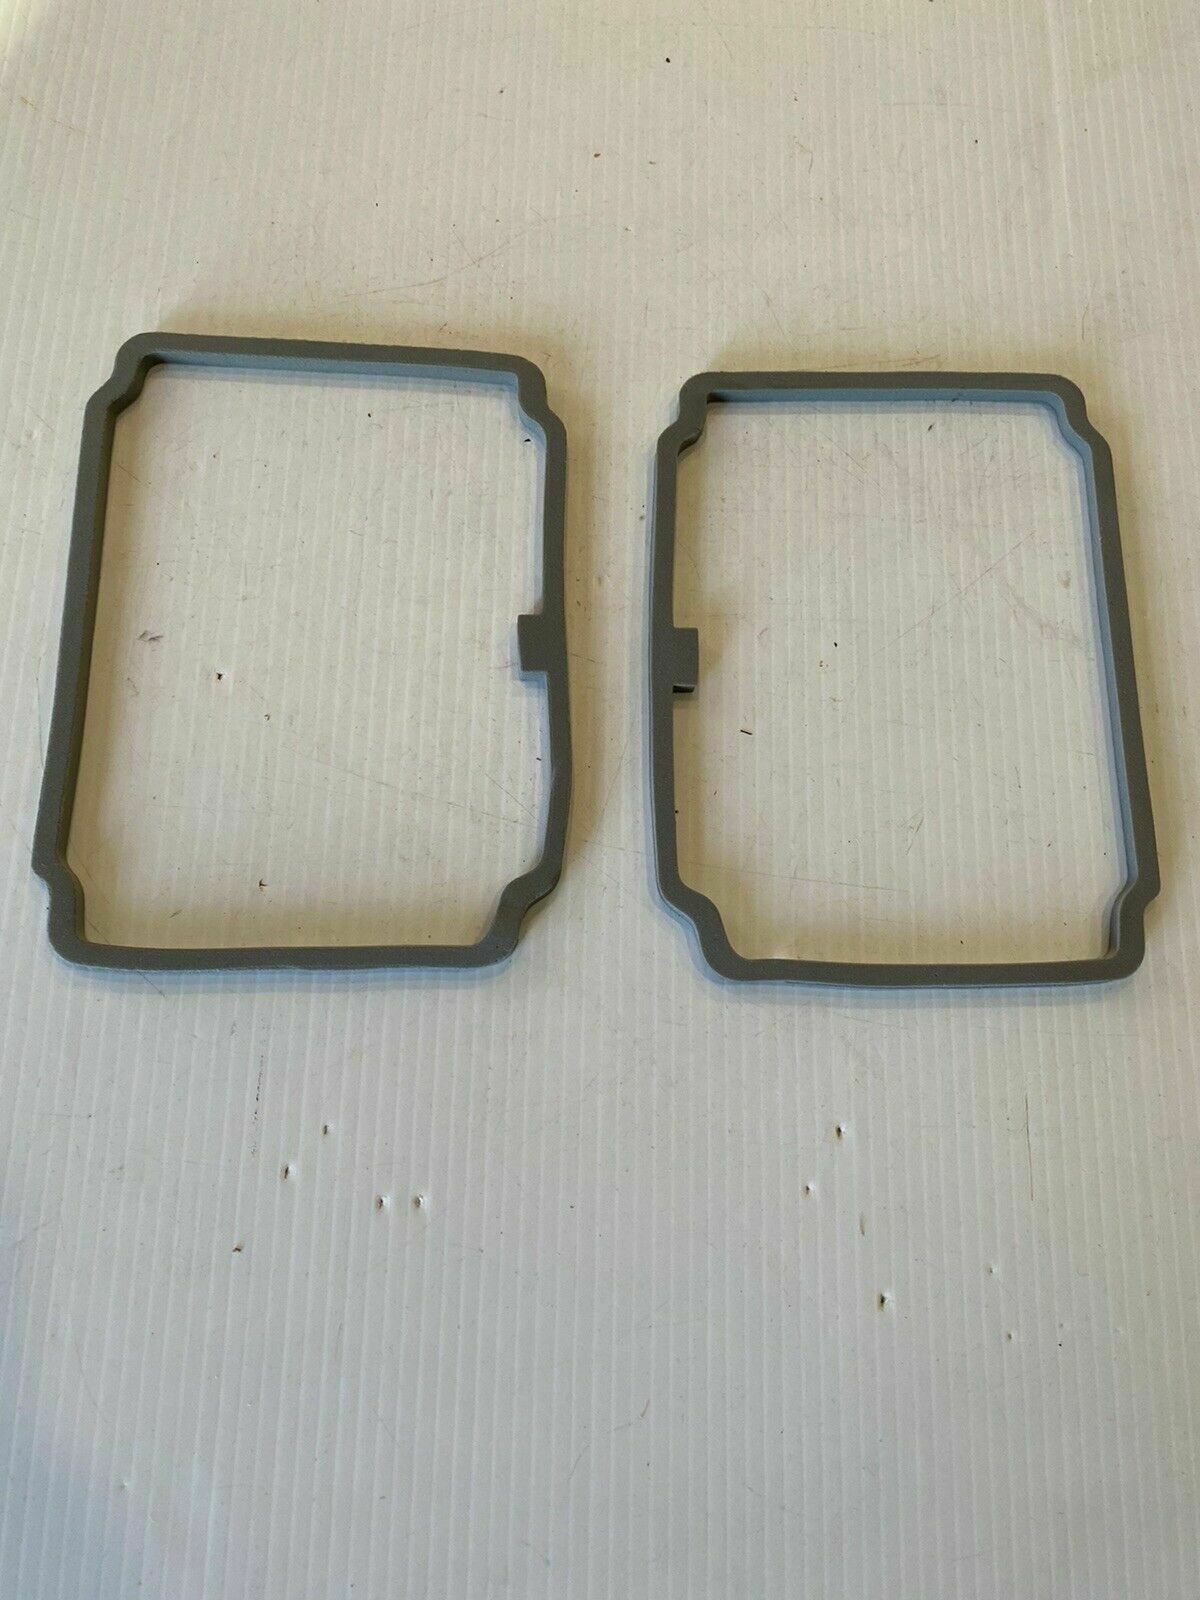 Gaskets: 1973-1980 Chevy Truck Tail Turn Light Lens Gaskets USA Pair